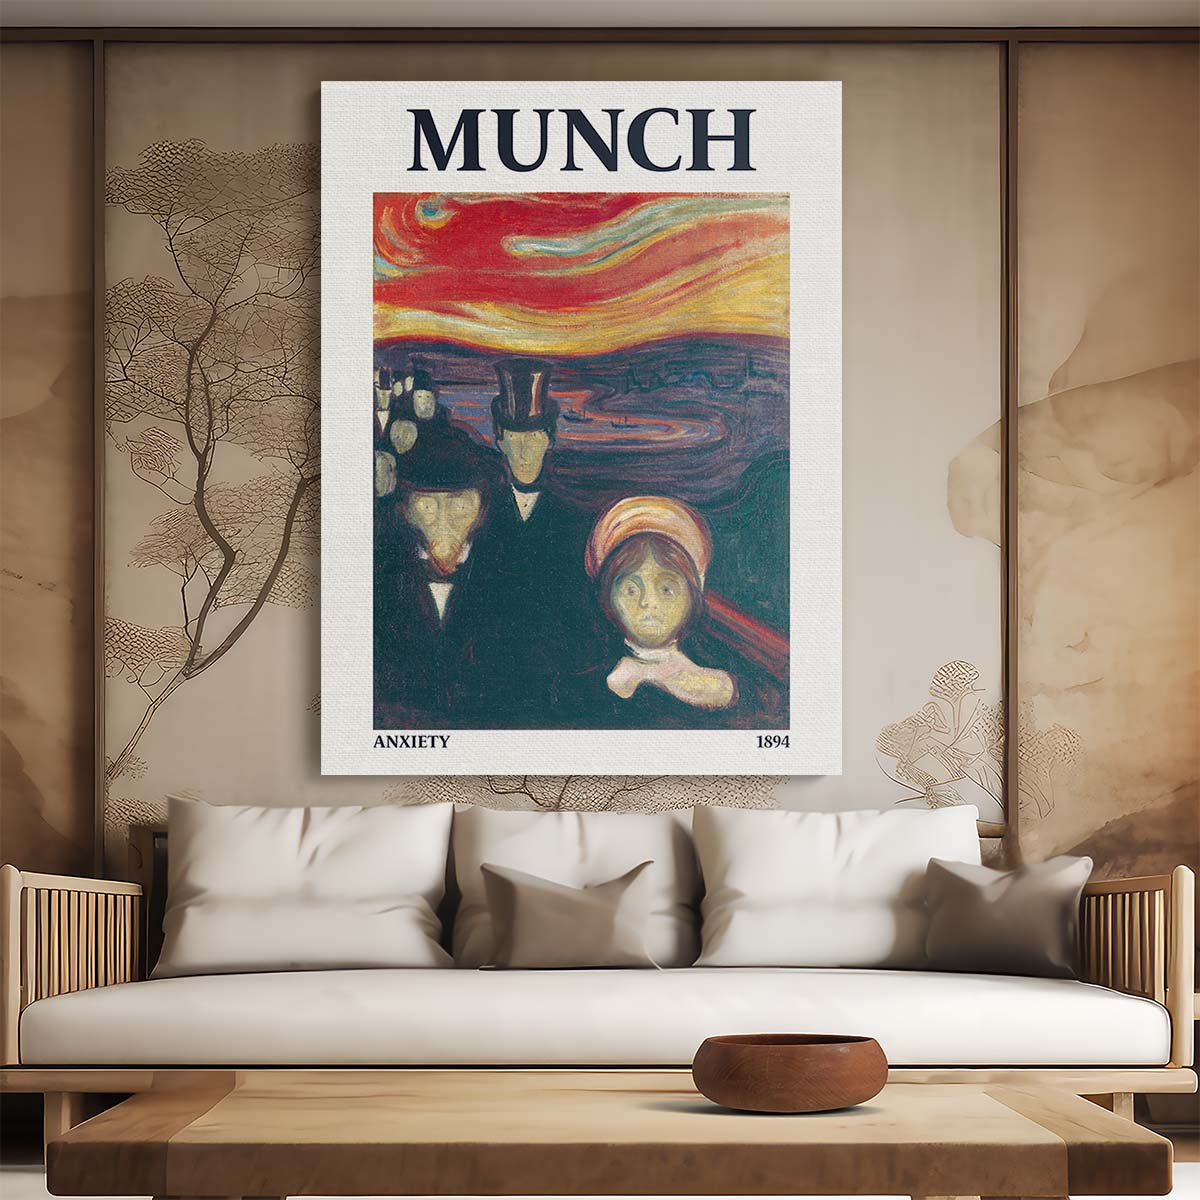 Edvard Munch Anxiety Acrylic Illustration Painting, 1894 Norway Masterpiece by Luxuriance Designs, made in USA